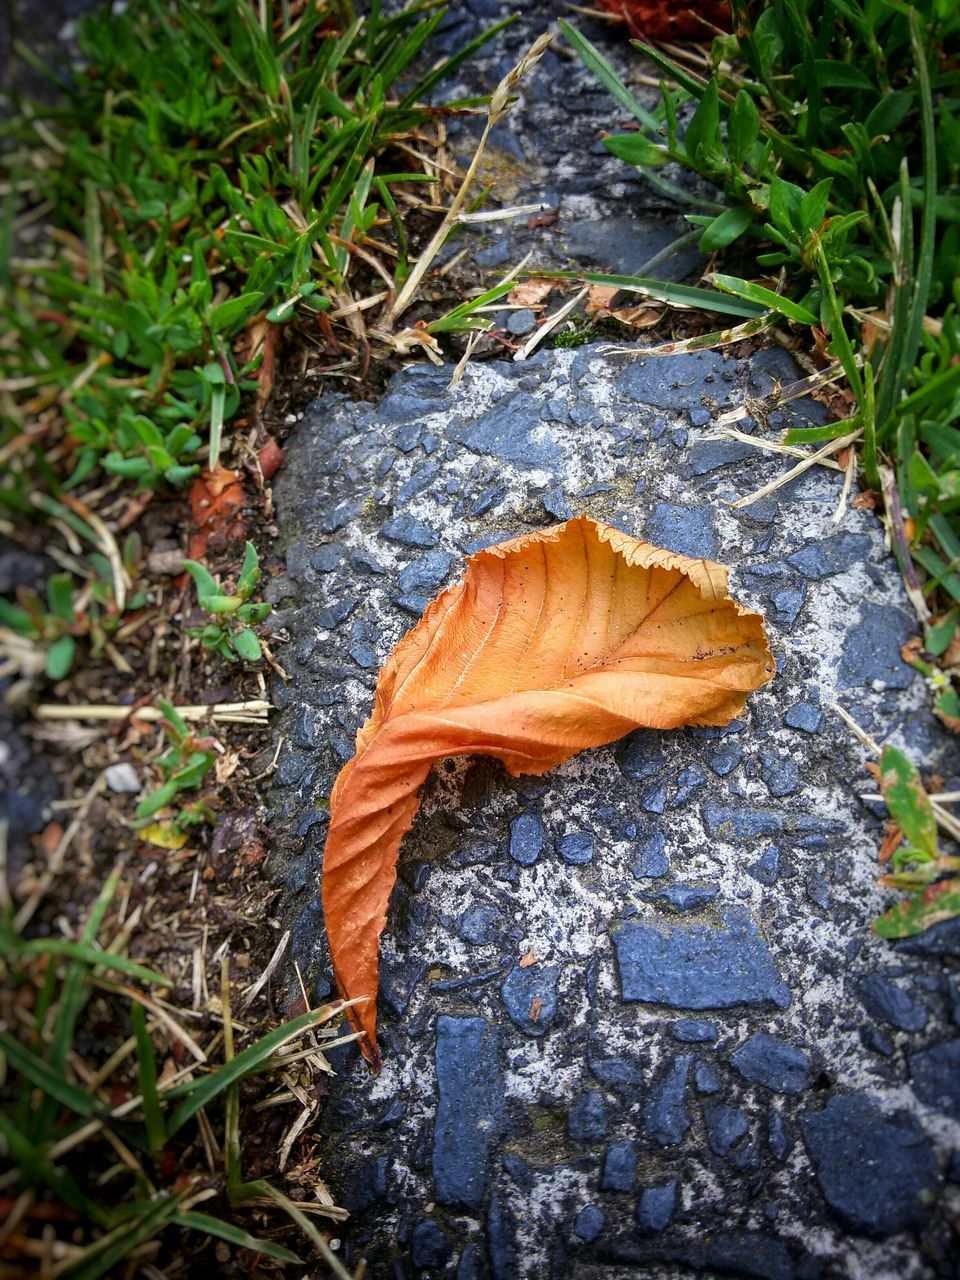 leaf, dry, autumn, high angle view, grass, change, fallen, nature, close-up, ground, field, natural pattern, fragility, leaves, season, outdoors, no people, day, rock - object, leaf vein